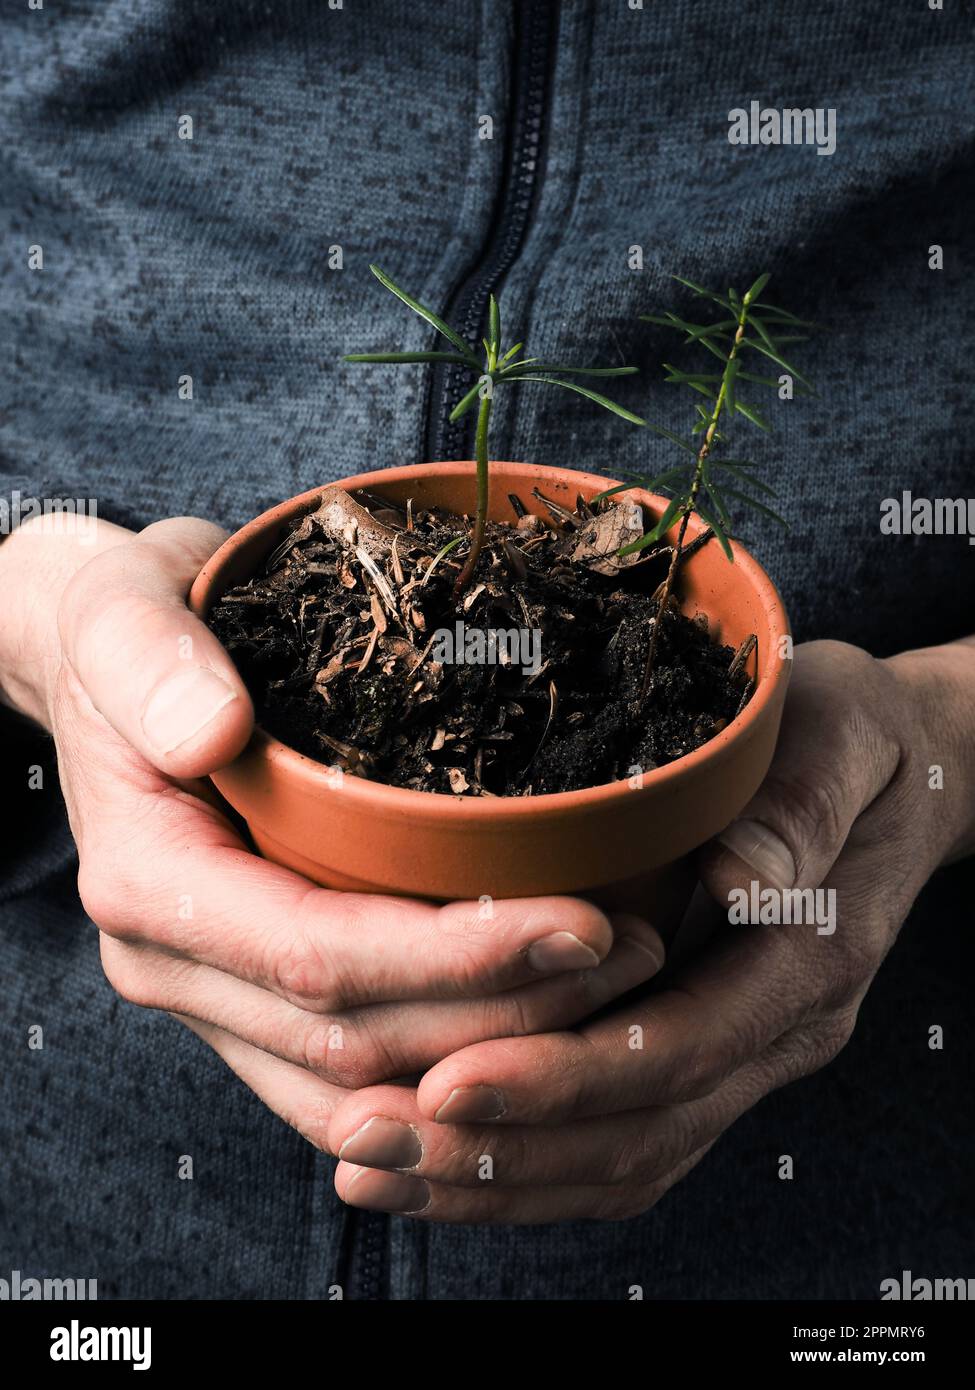 A gardener holds a plant pot with various fir trees seedlings, reforestation or cultivation concept, natural carbon dioxide storage against climate ch Stock Photo